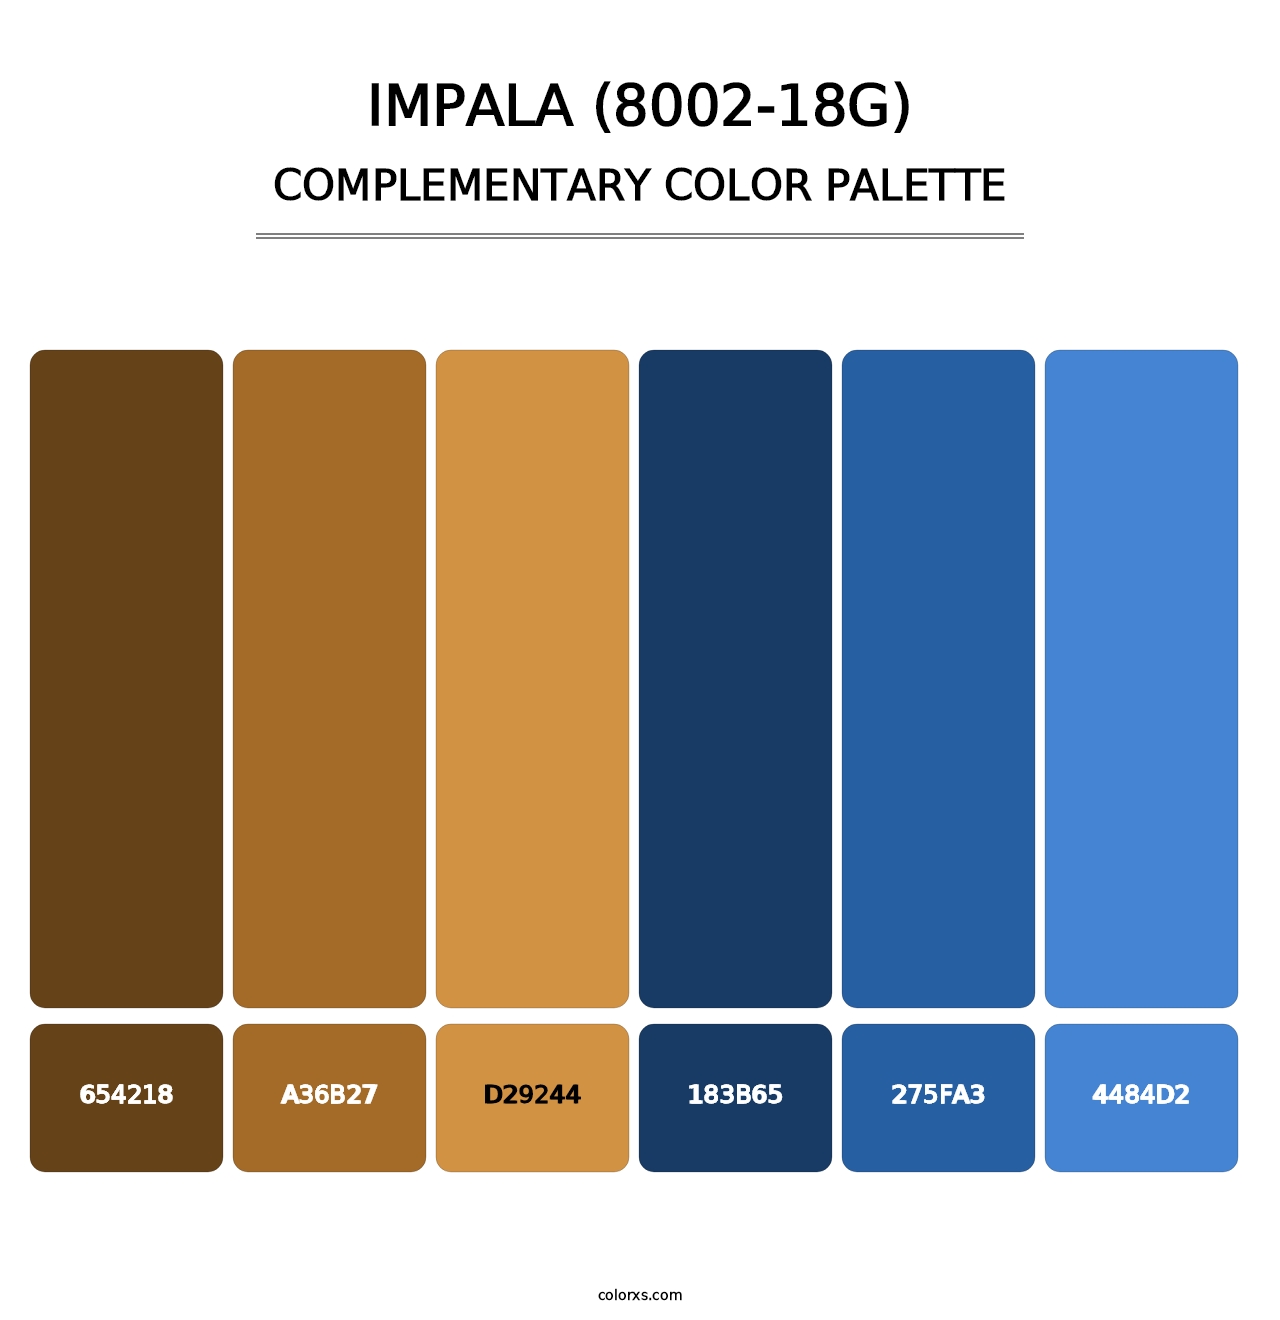 Impala (8002-18G) - Complementary Color Palette